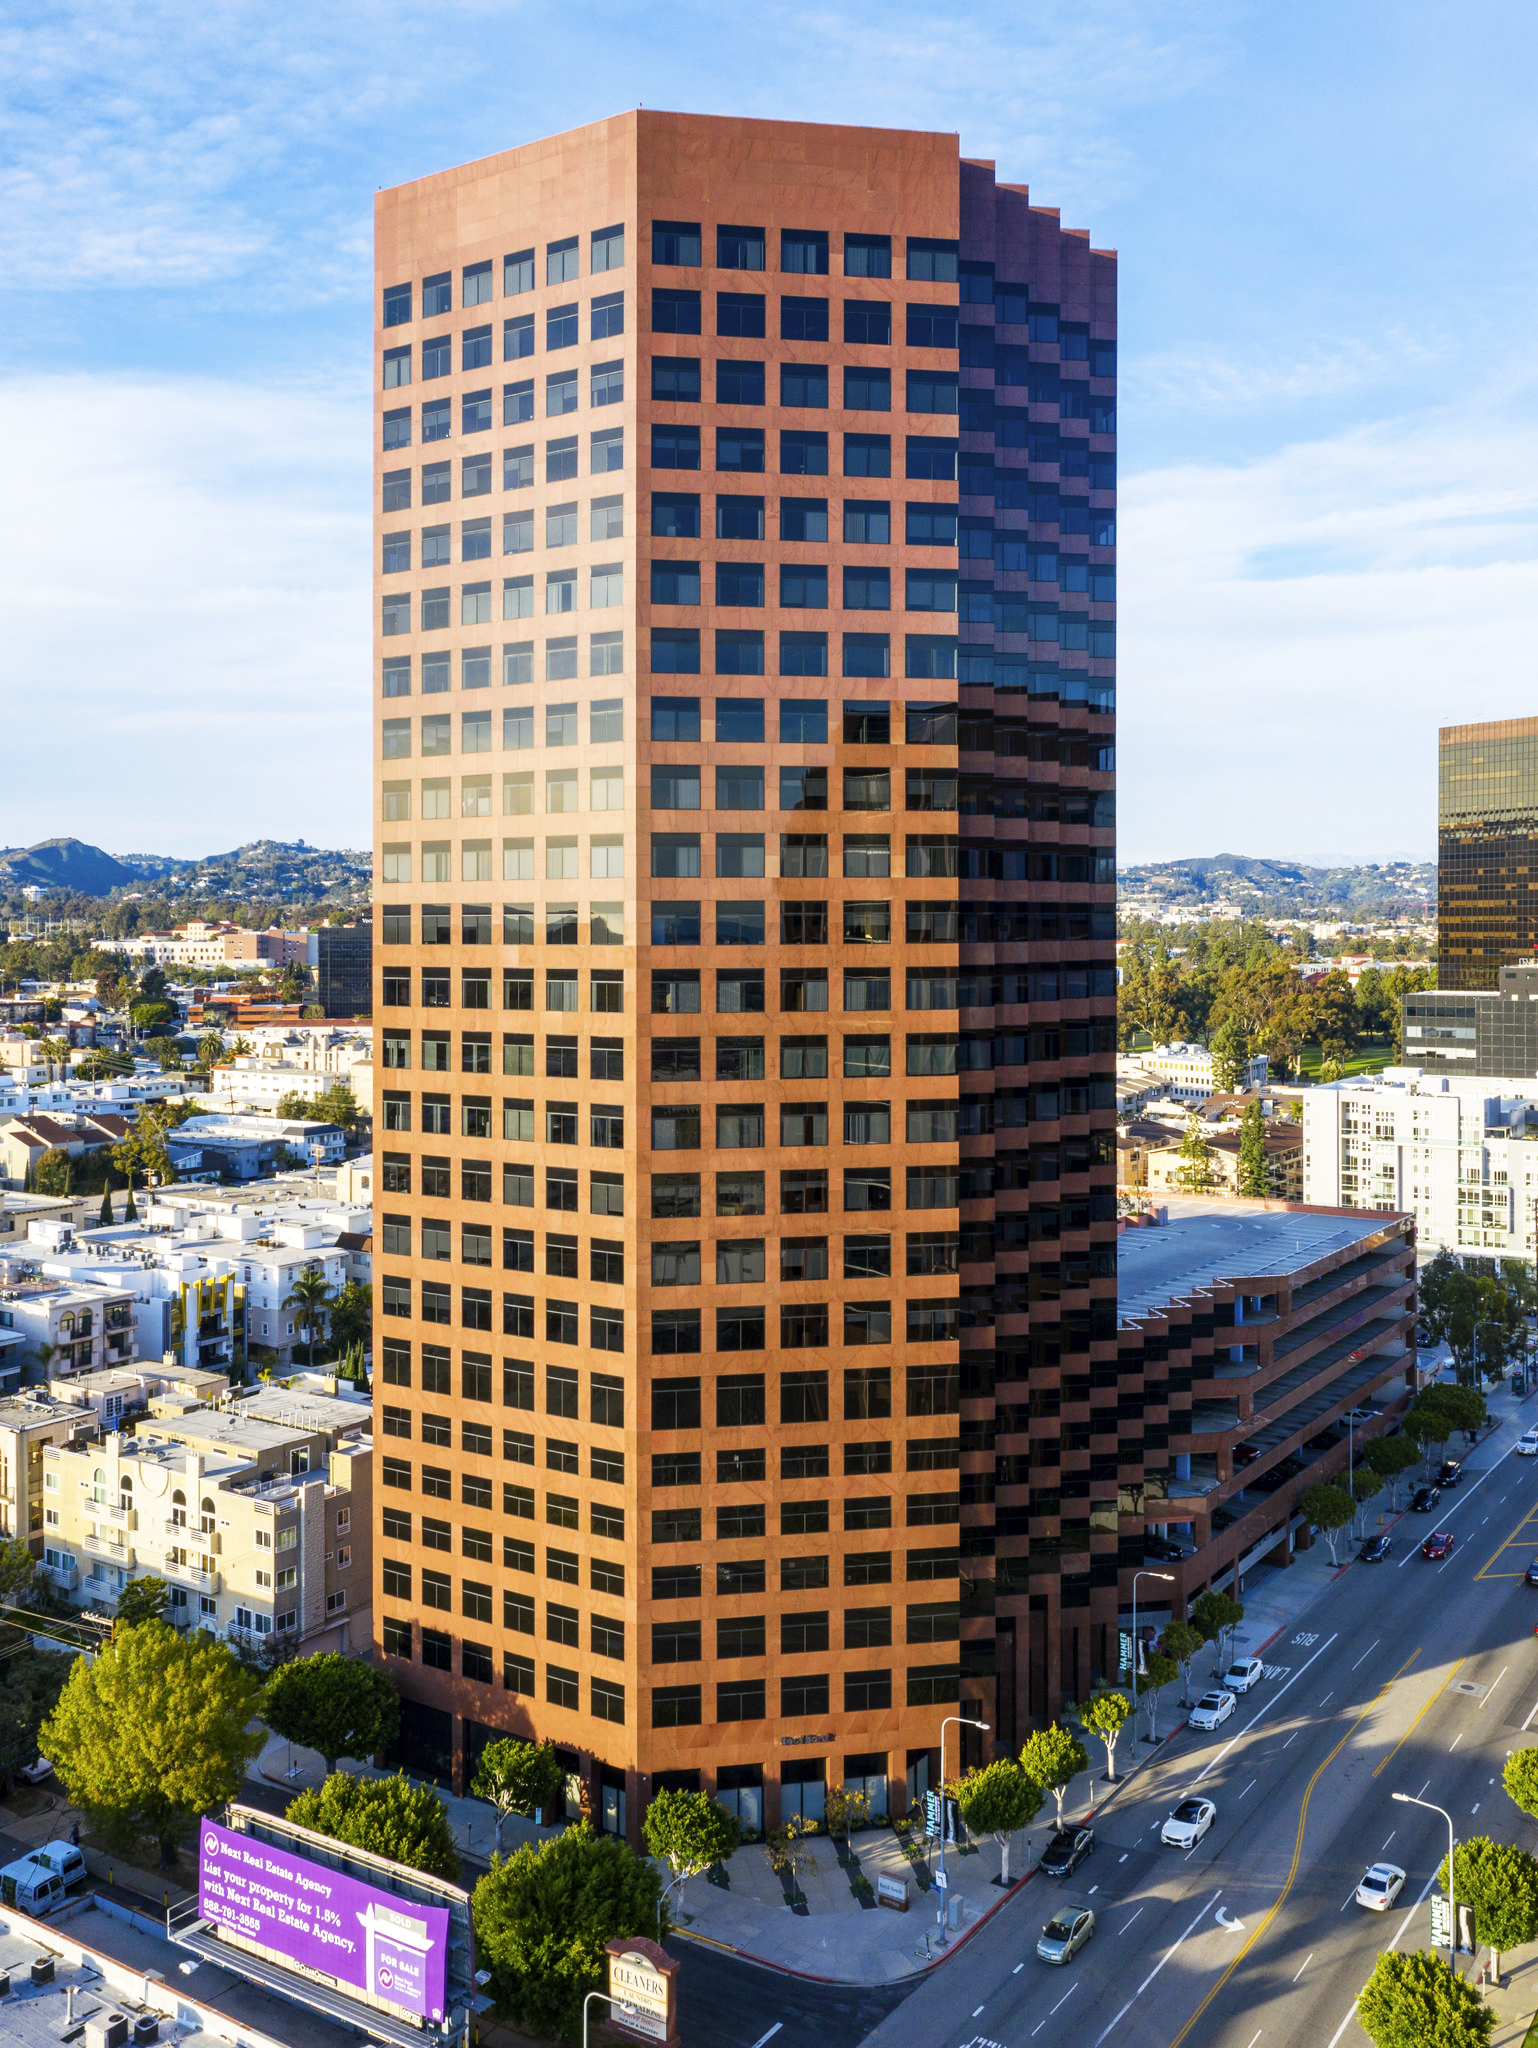 Avison Young awarded leasing assignment for 11755 Wilshire, a class A office tower in Brentwood